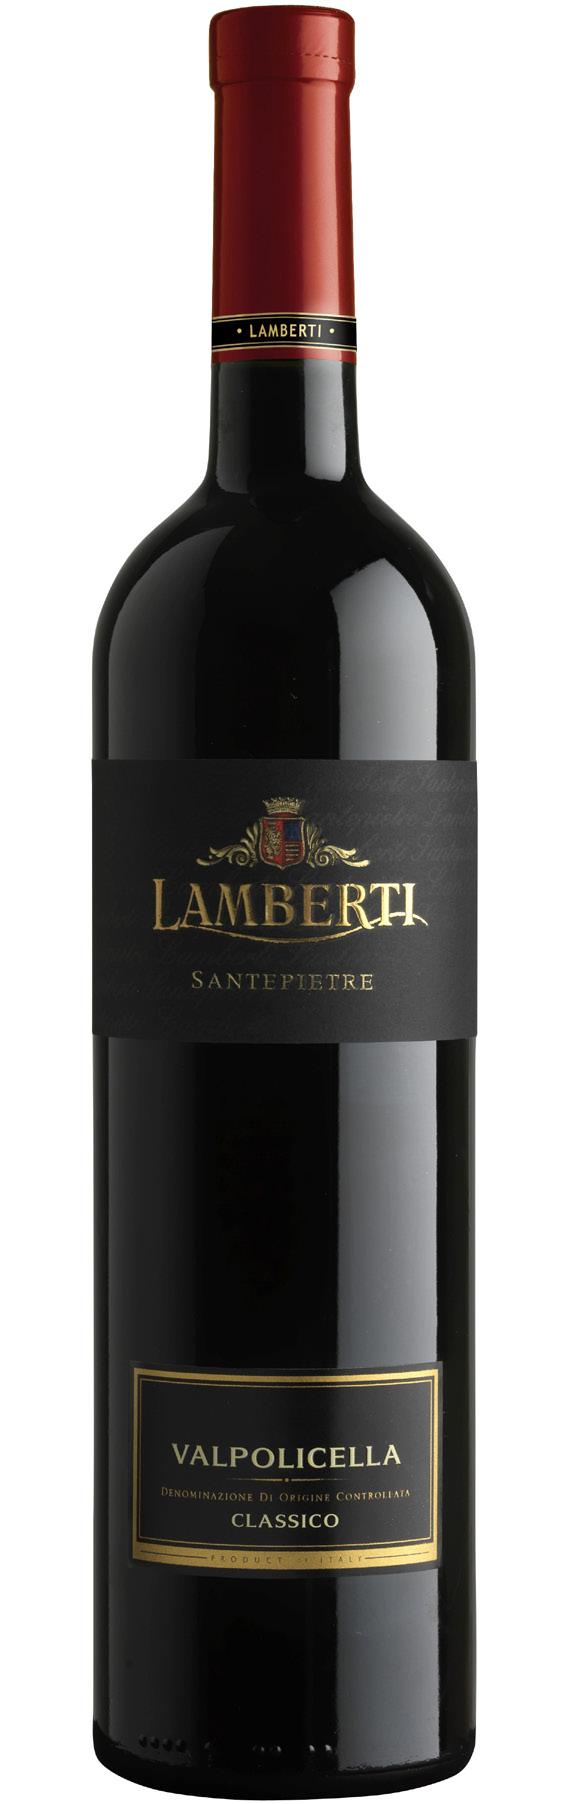 WINES Lamberti Santepietre Valpolicella Classico DOC 2015 Italy Veneto Wine Introduction Selected parcels from the hills of the DOC Classico zone in the north-west of Verona, averaging 200 metres